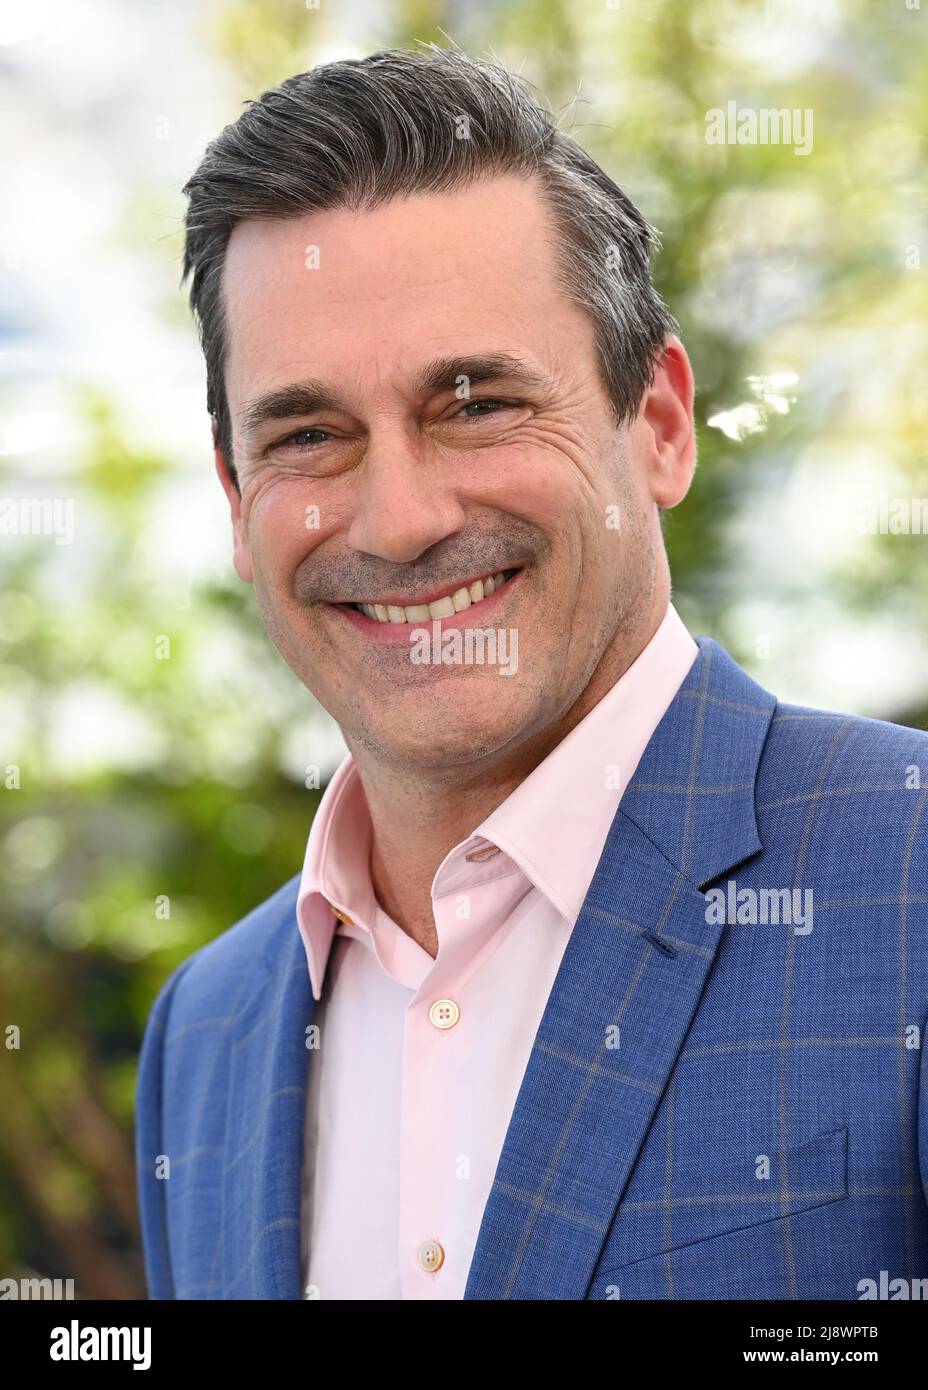 Cannes, France. May 18th, 2022. Cannes, France. Jon Hamm attending the Top Gun Maverick photocall, part of the 75th Cannes Film Festival, Palais de Festival, Cannes. Credit: Doug Peters/EMPICS/Alamy Live News Stock Photo